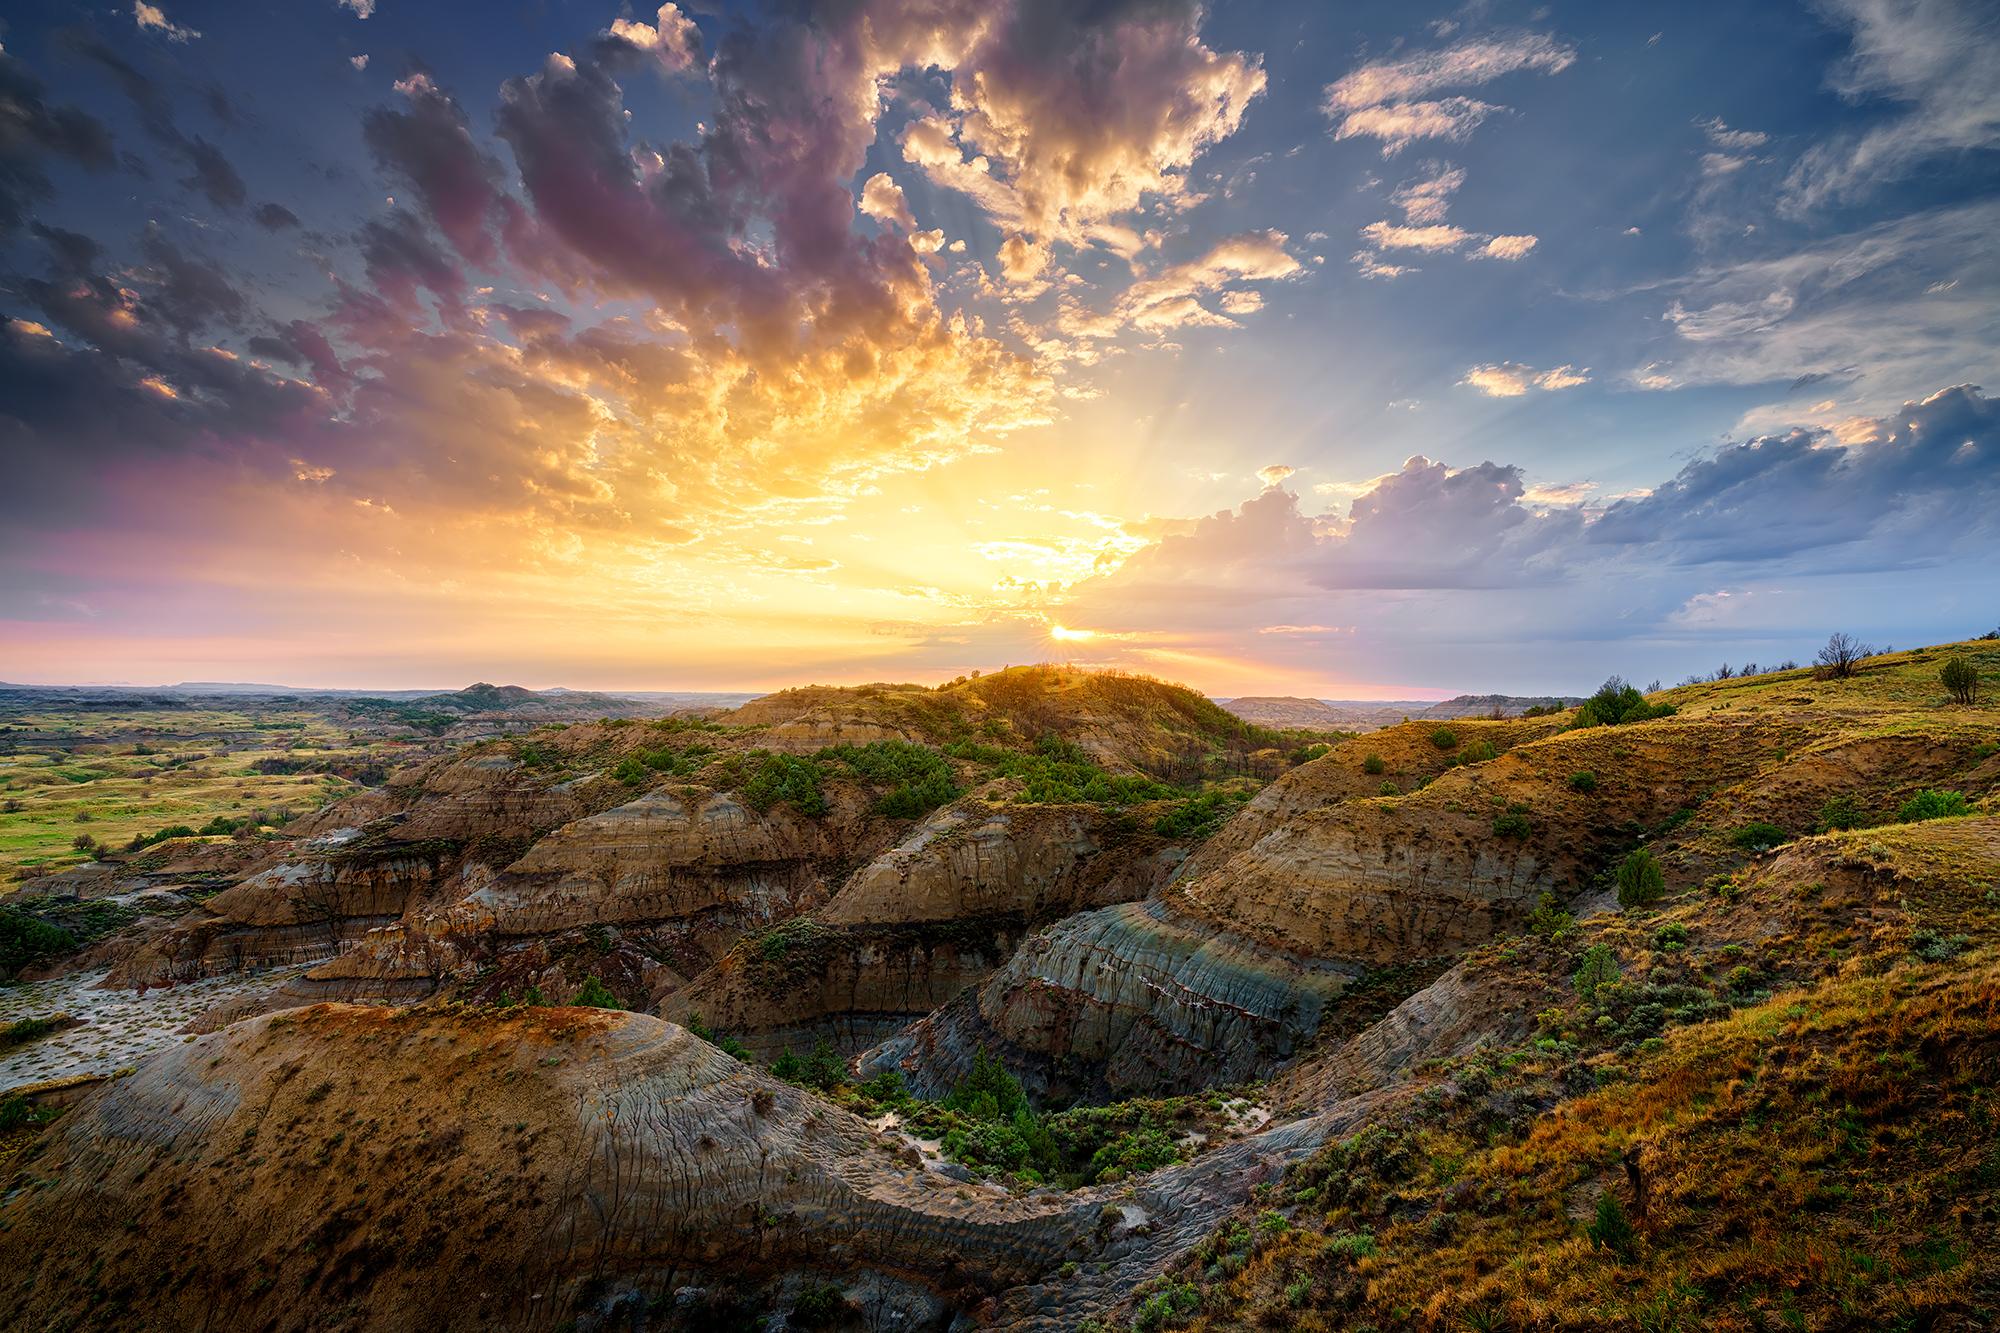 The setting sun shines through the remaining clouds from a summer thunderstorm in the badlands of North Dakota at Theodore Roosevelt National Park.